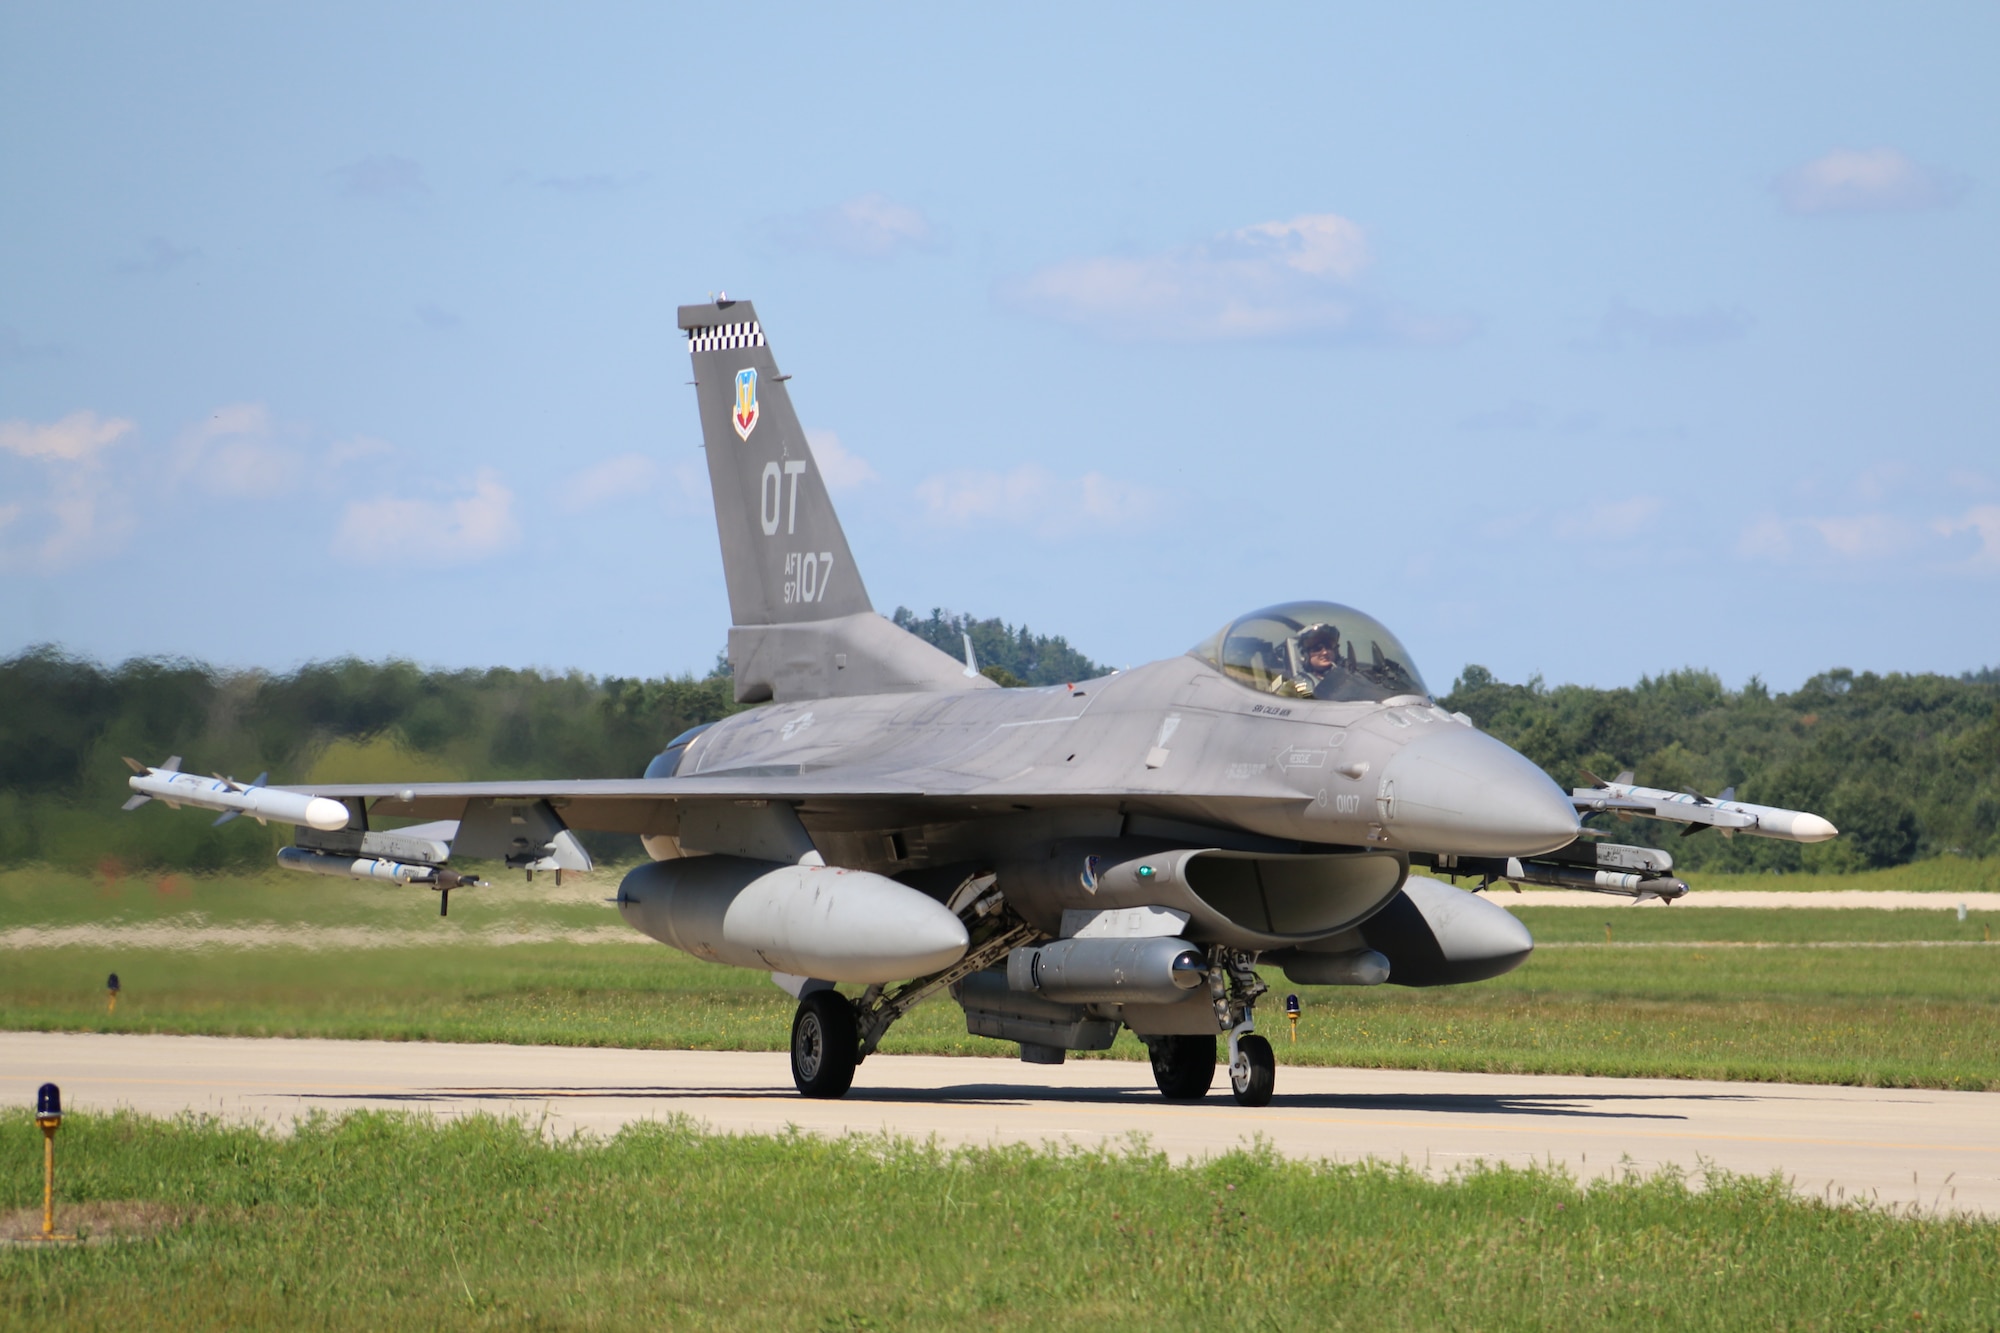 An F-16C equipped with Lockheed Martin's Legion Pod tests the infrared search and track technology during exercise Northern Lightning 21. (U.S. Space Force Photo by Senior Airman Mira Roman)